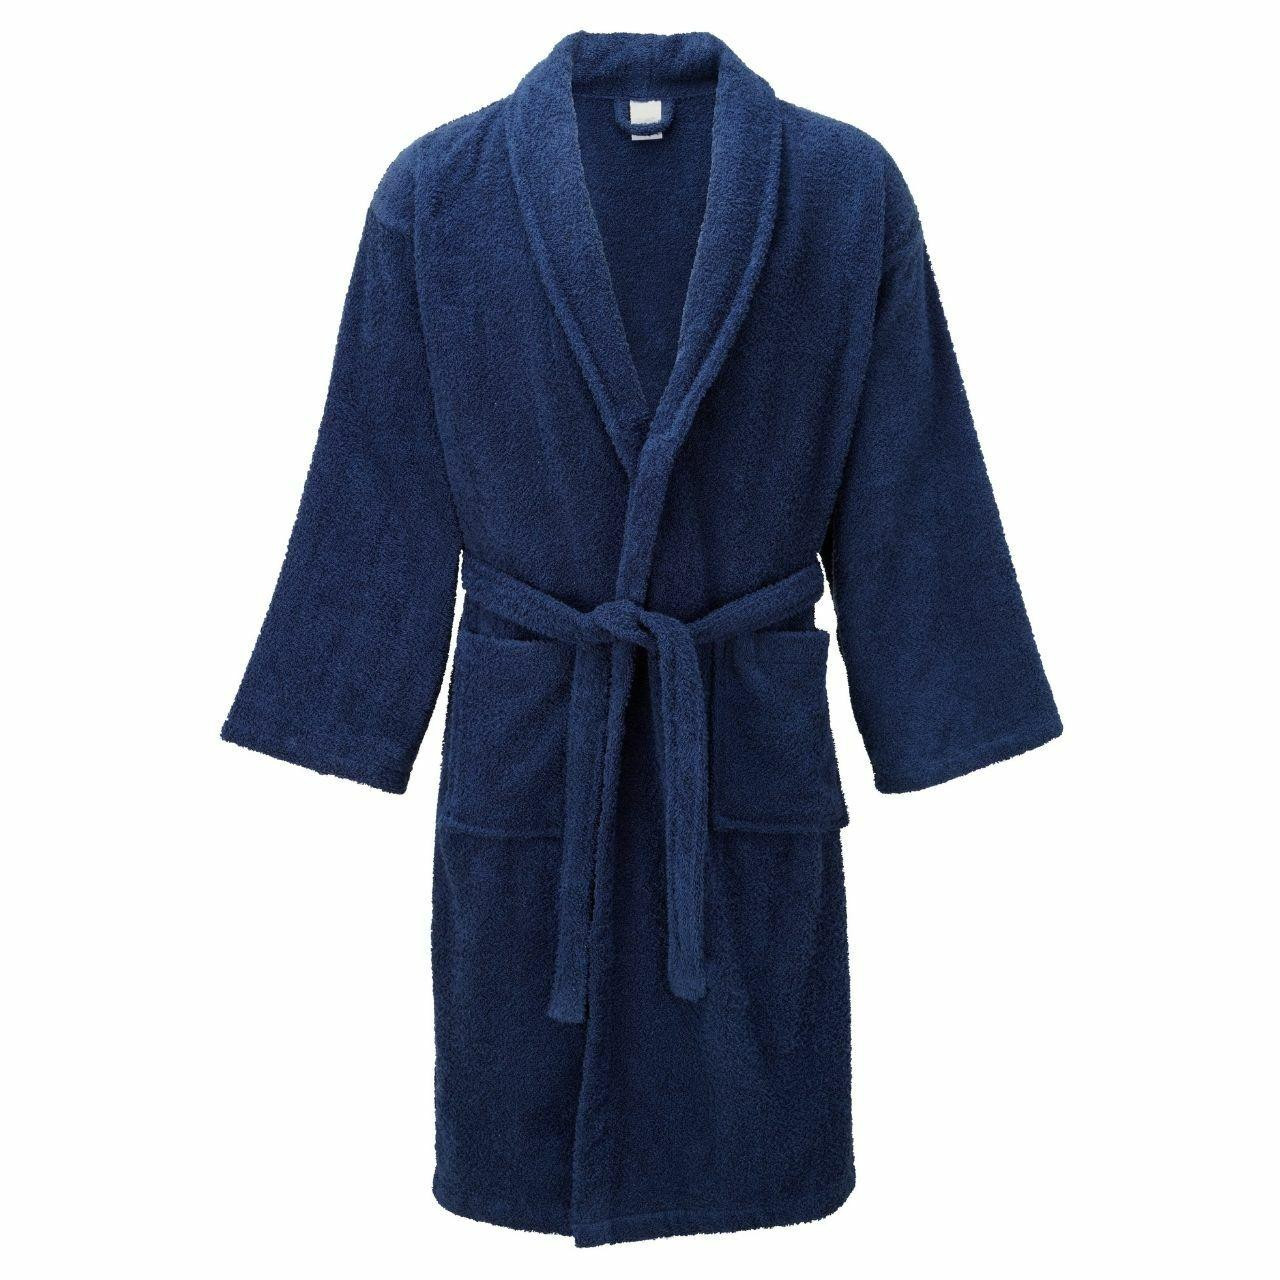 Bath Robe 100% Egyptian Cotton Extra Soft & Luxury Terry Towelling Robe Gown 